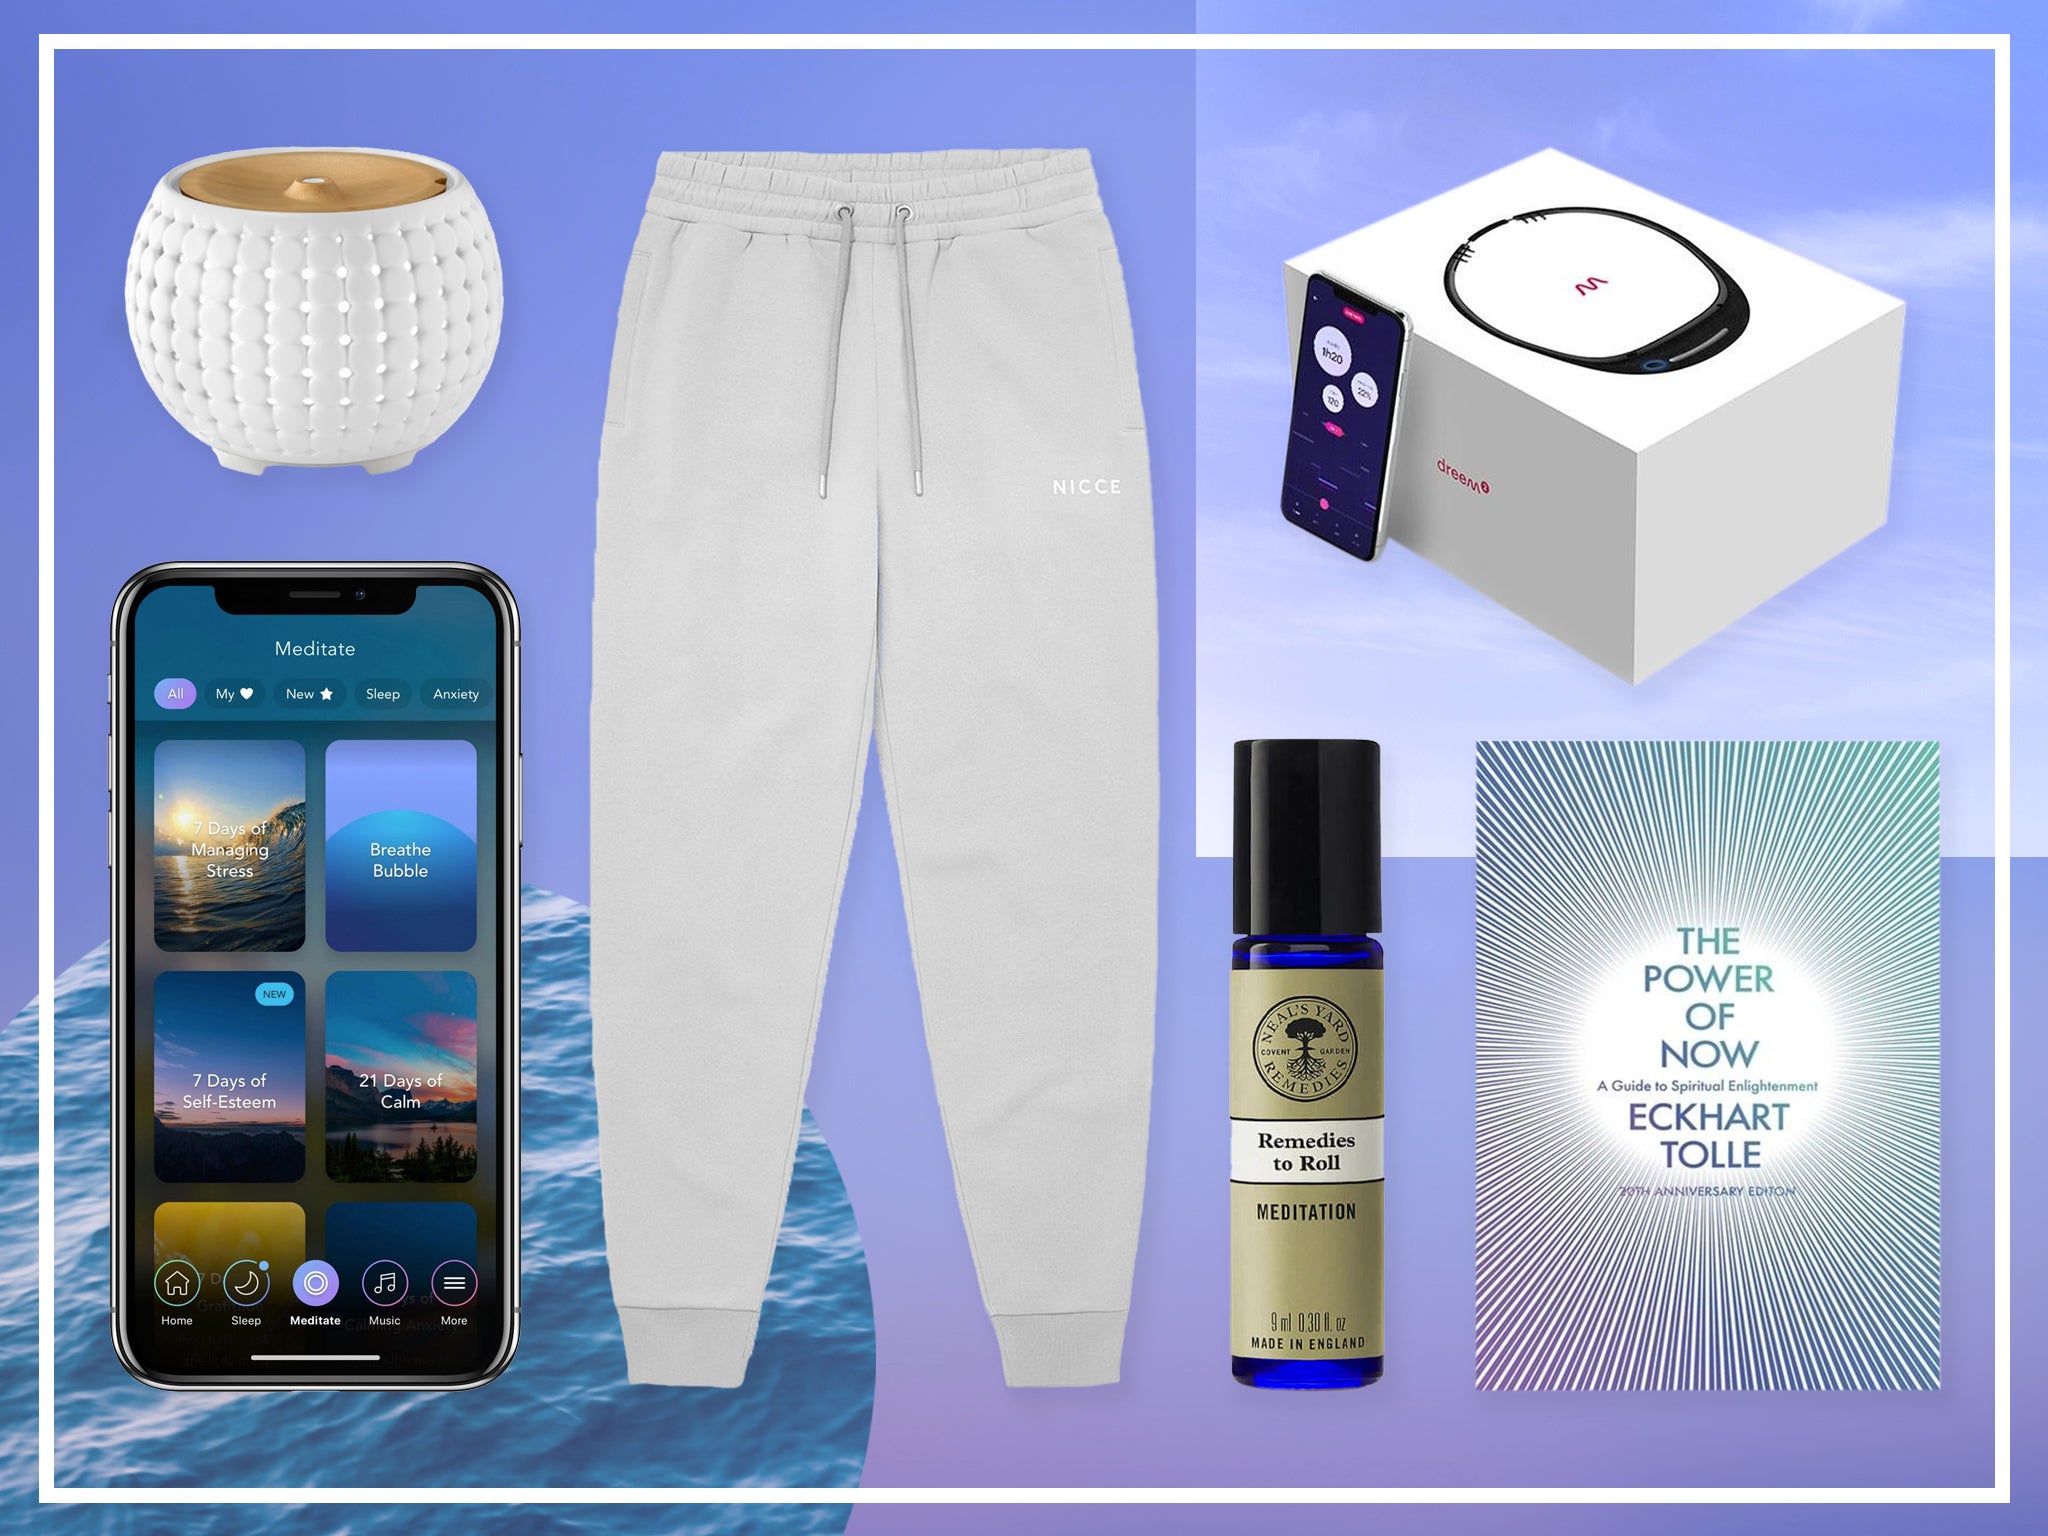 From apps to aromatherapy diffusers, we’ve consulted the experts to find these meditation must-haves